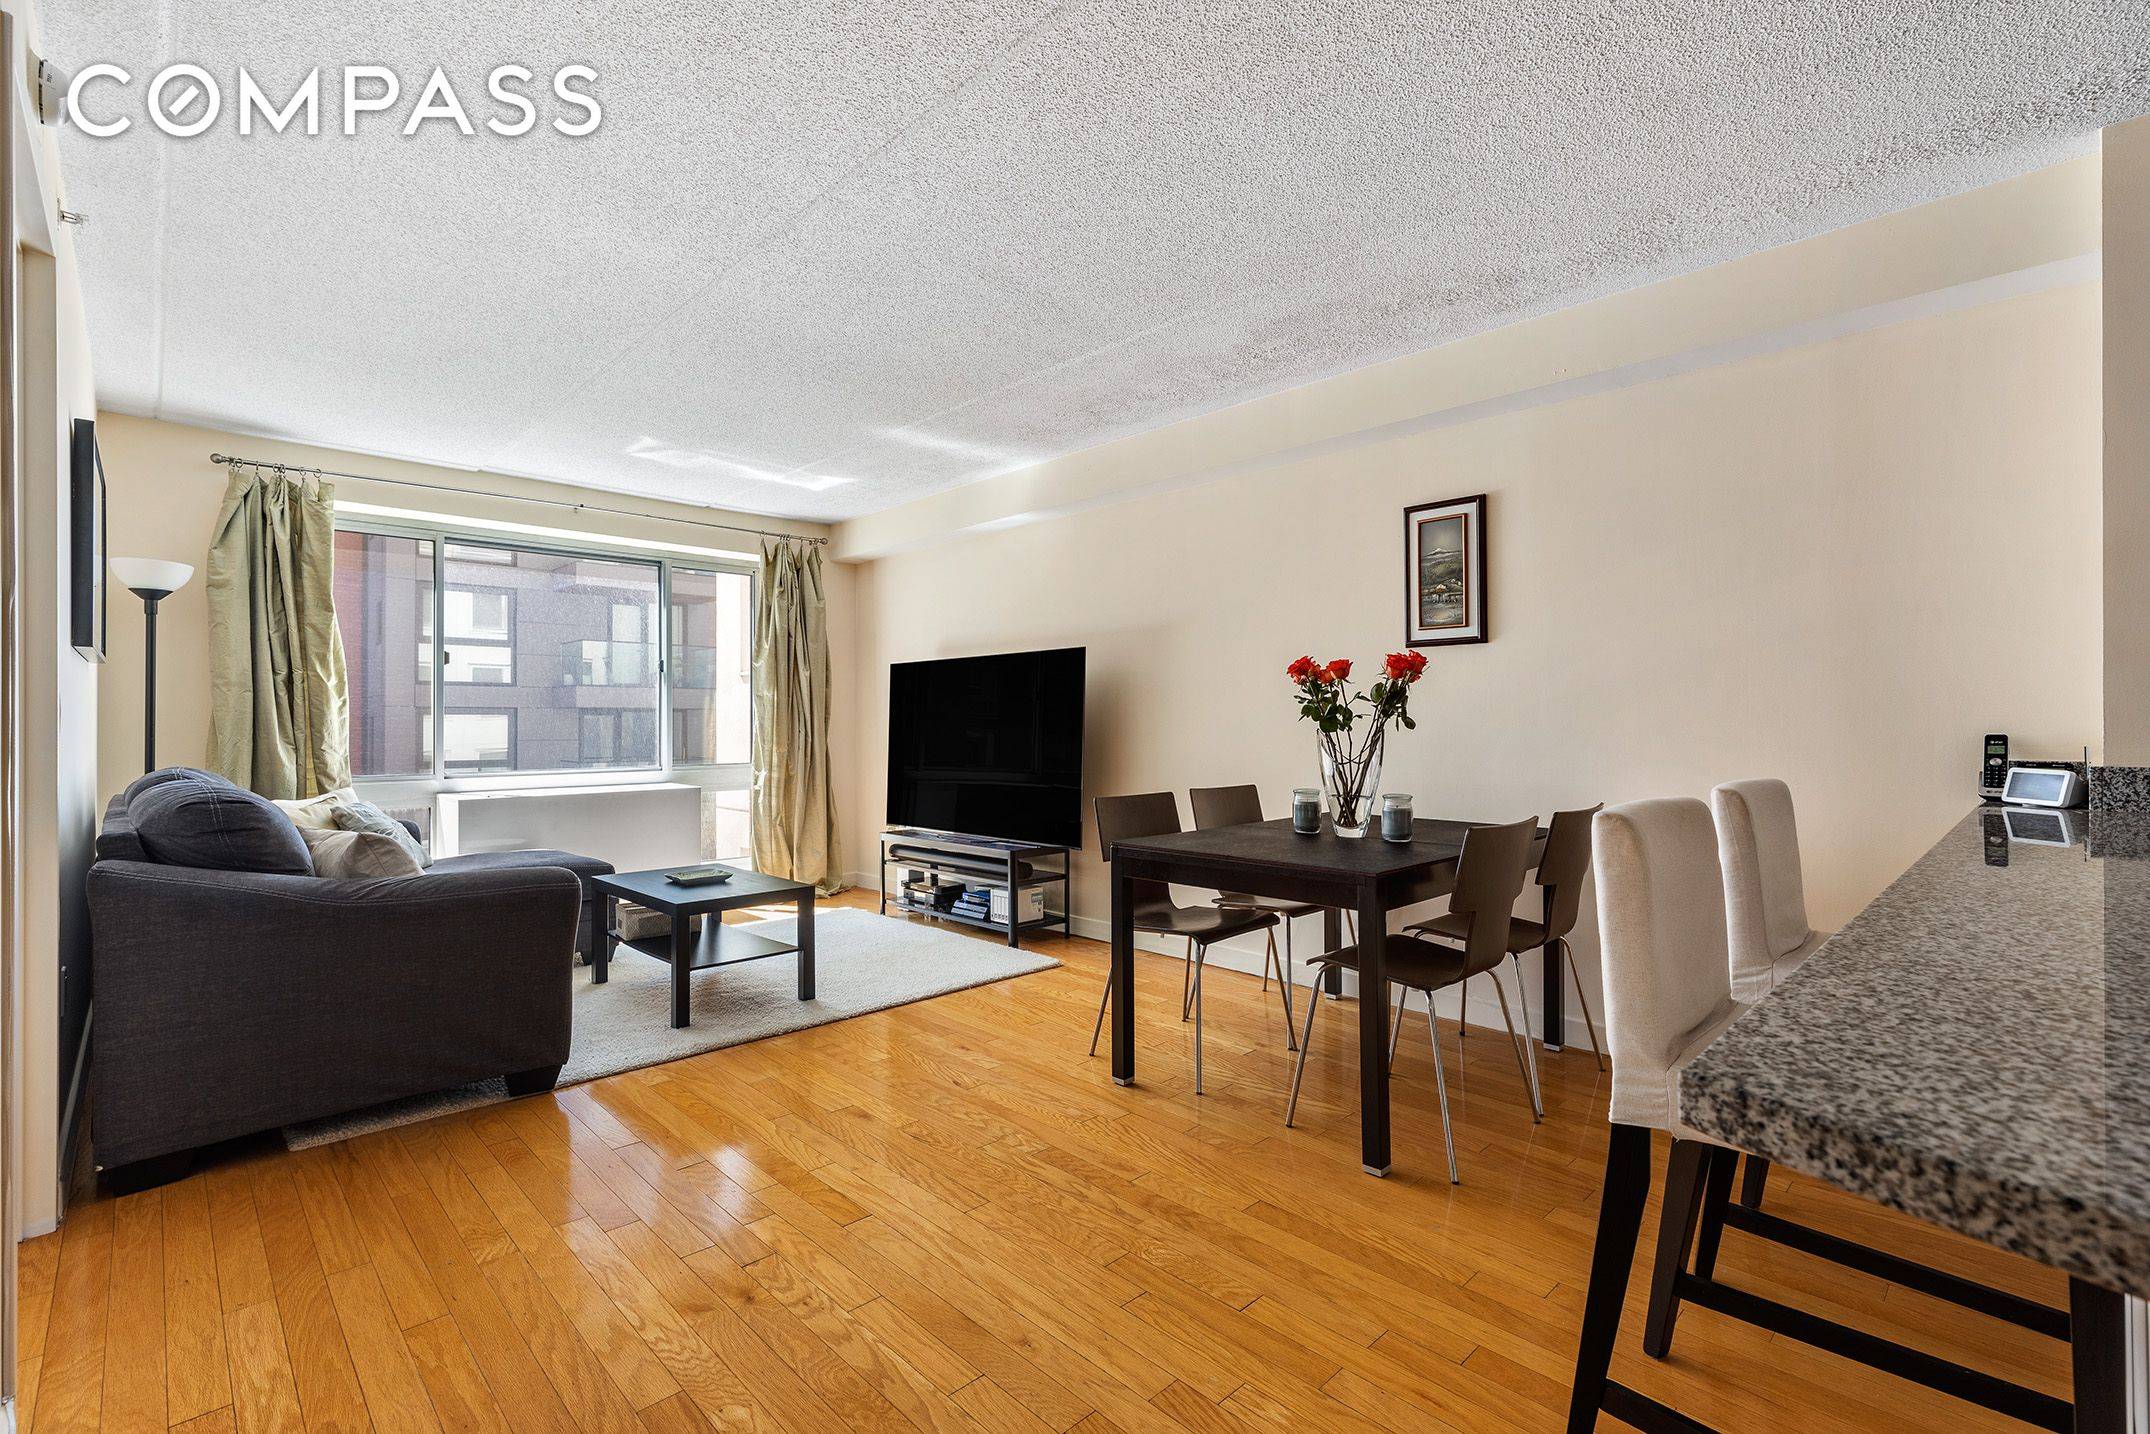 Welcome home to this south facing, bright and well laid out one bedroom home !